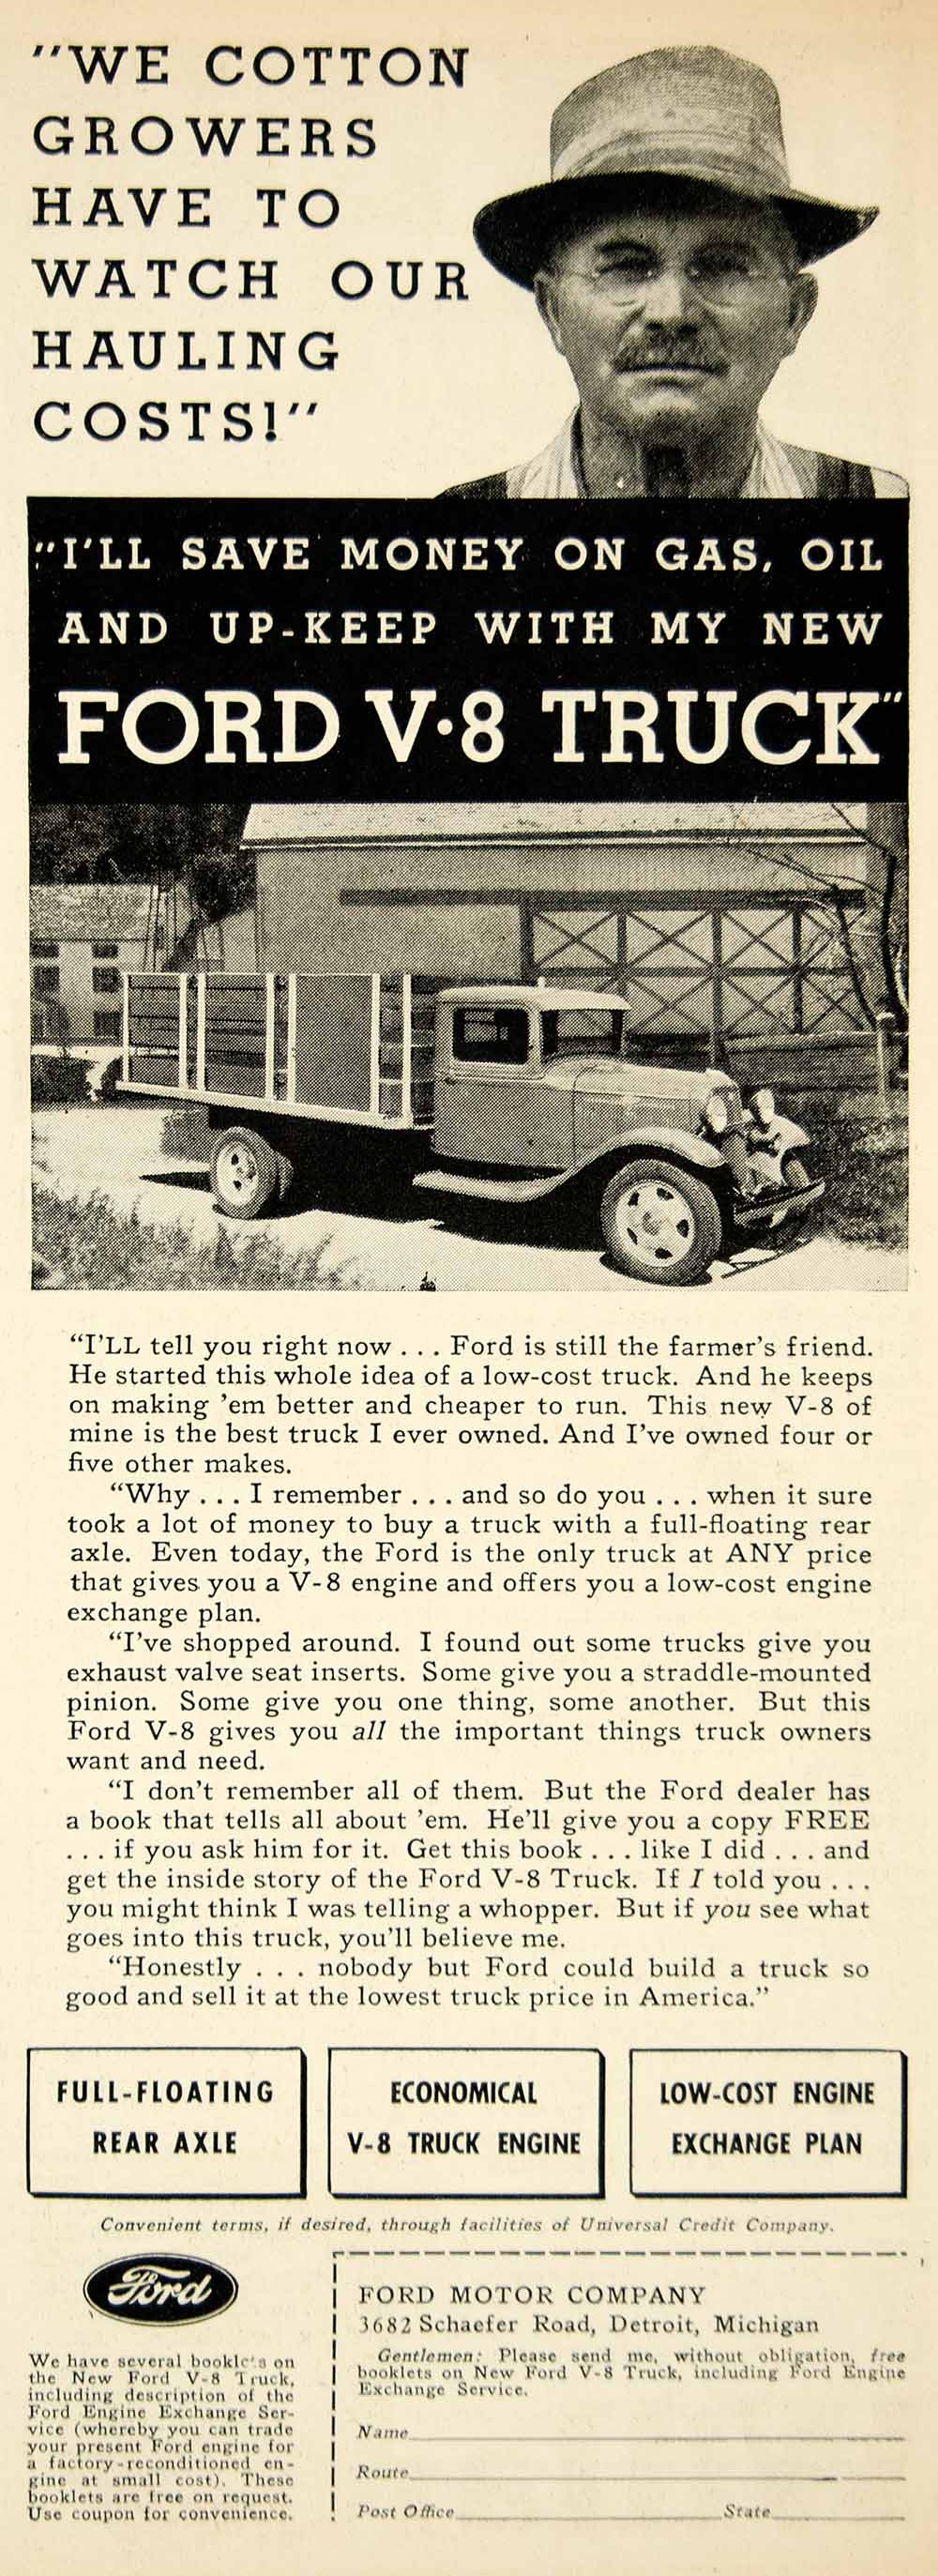 1934 Ad Ford V8 Truck Vehicle Cotton Automobile Motor Agriculture Farming YSA1